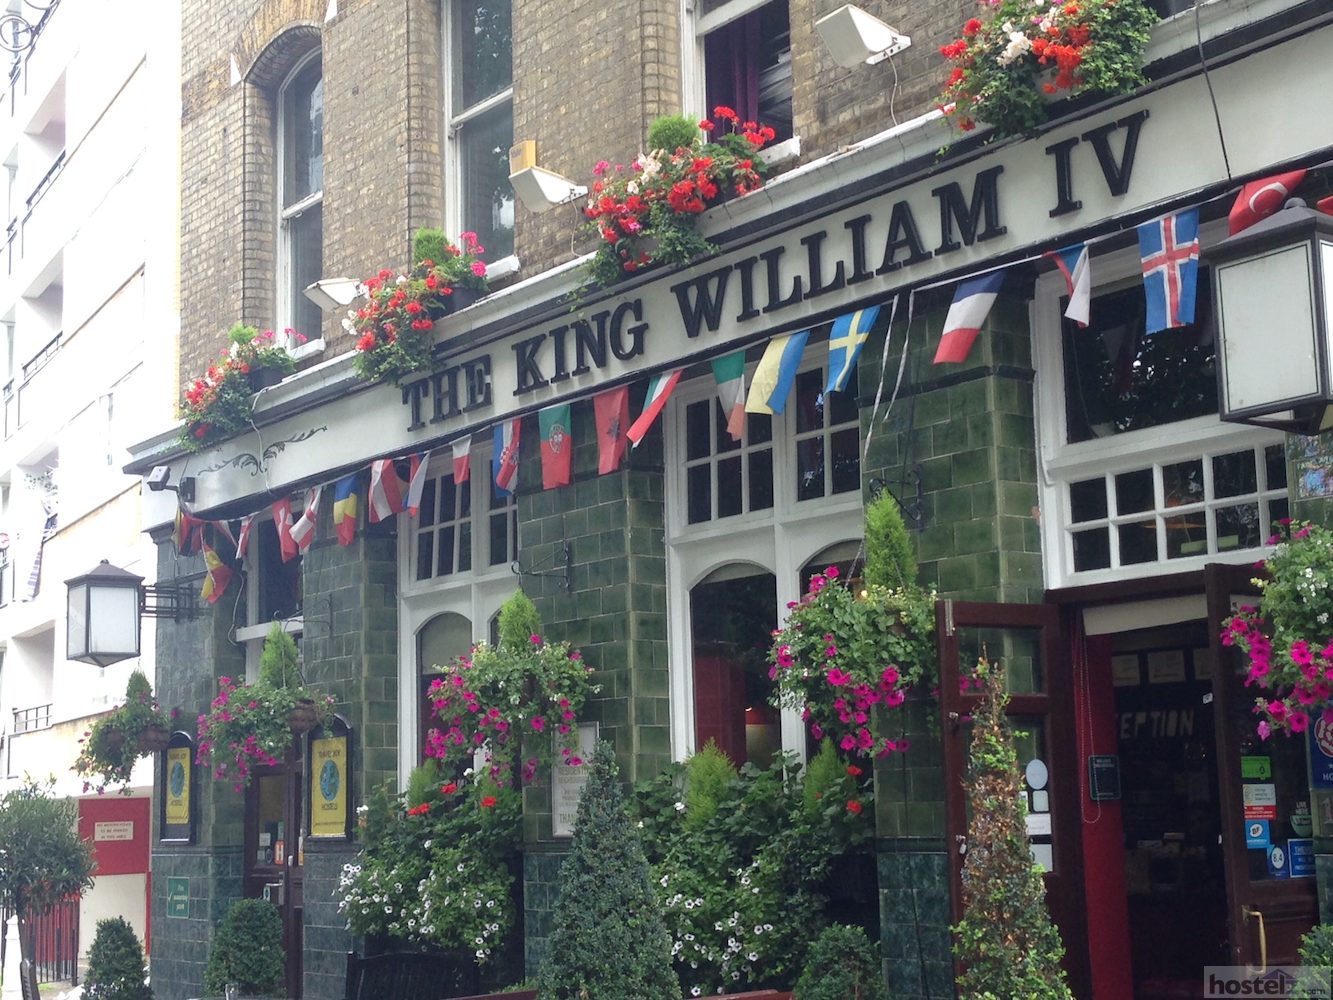 Welcome to Travel Joy at King William IV pub